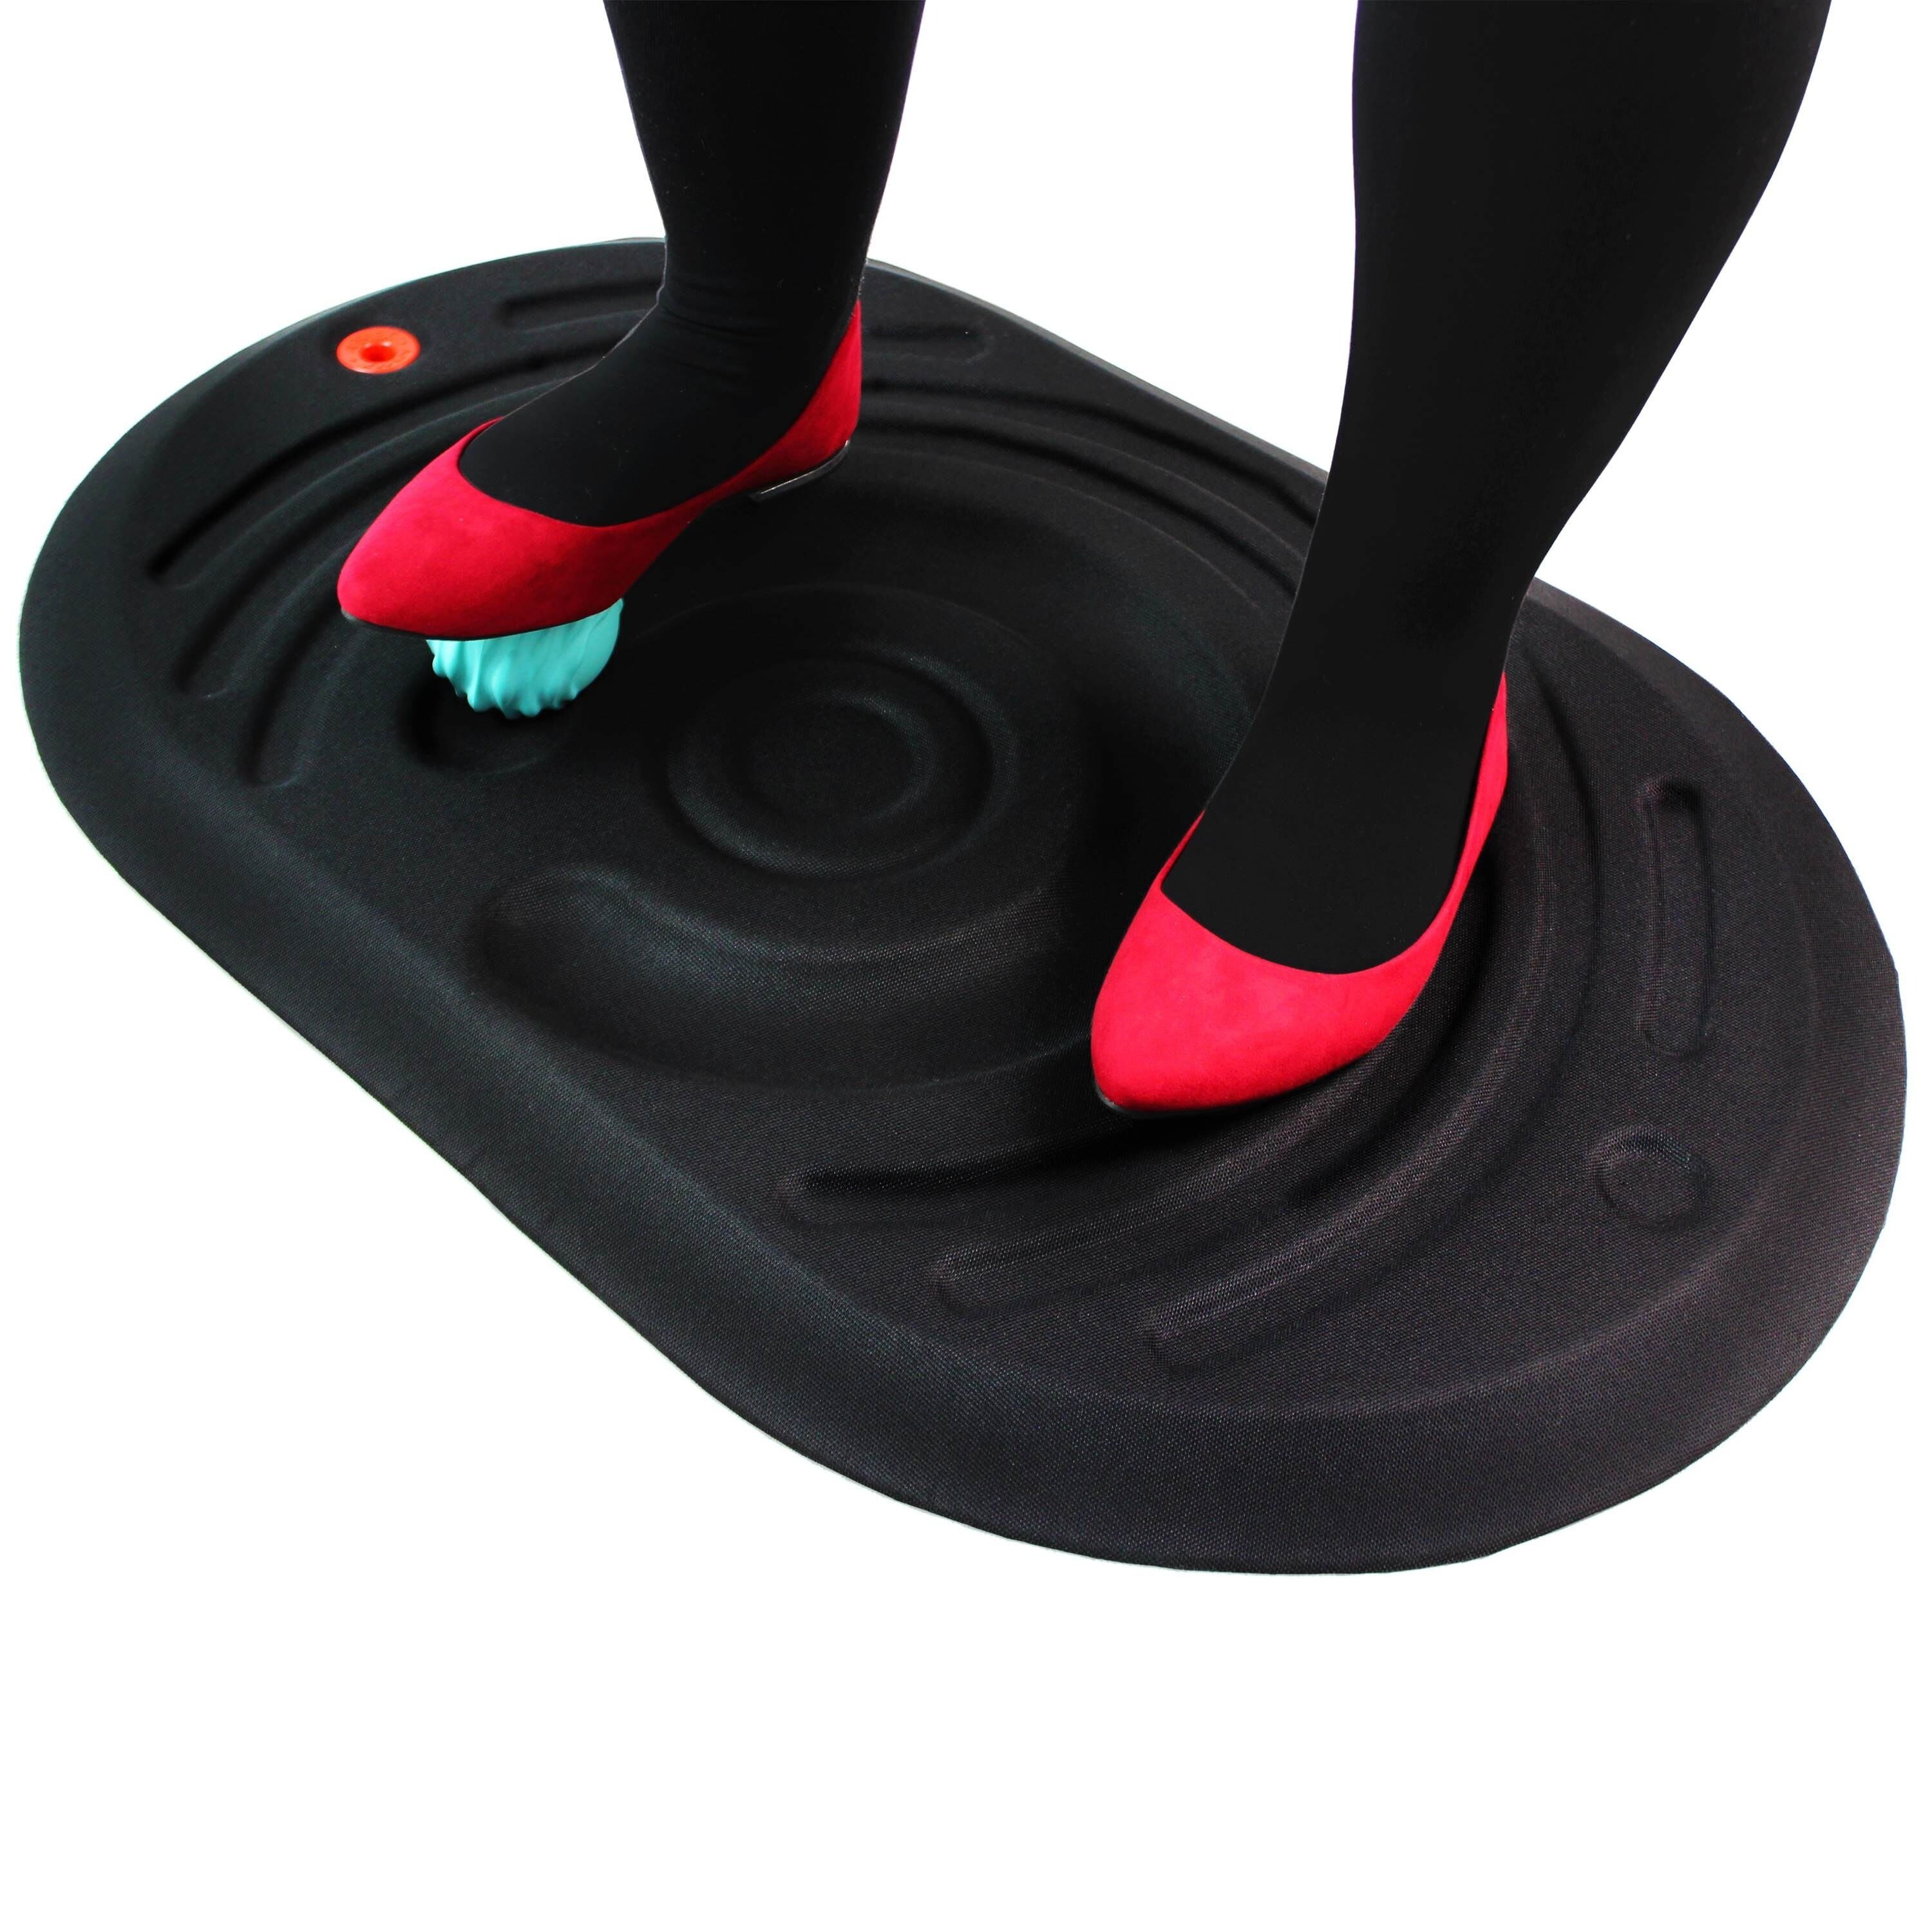 https://ak1.ostkcdn.com/images/products/22814586/AFS-TEX-Active-Standing-Platform-with-Foot-Roller-Balls-18-x-28-ccaf47f8-20f2-4d80-8fe8-4bf21a8cbcf7.jpg